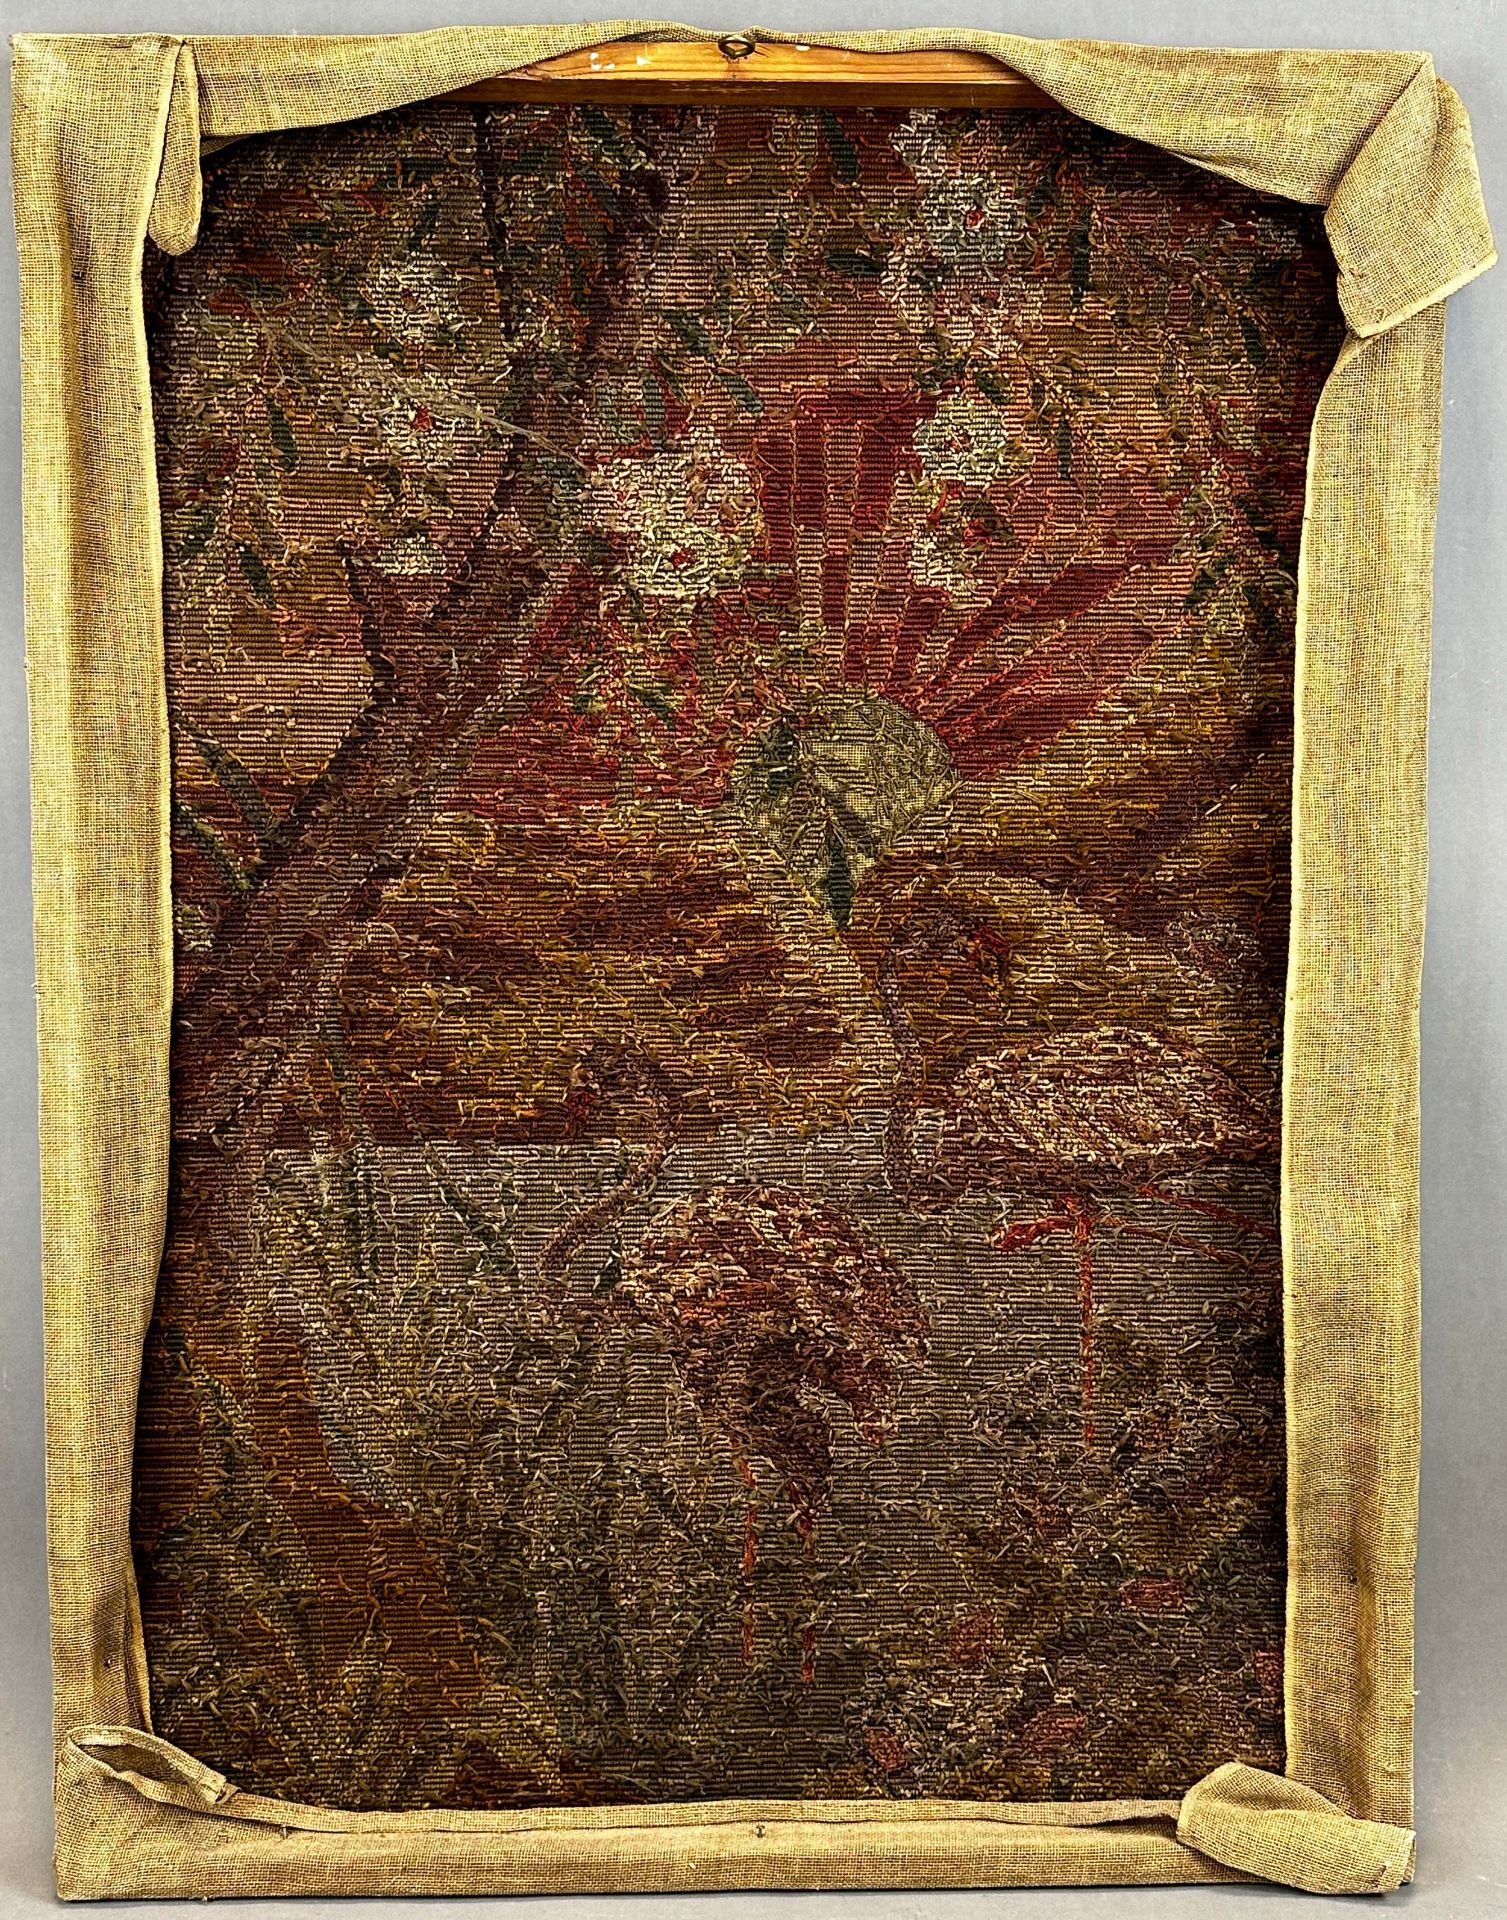 Gros-Point embroidery. Europe. Approximately 100 years old. - Image 10 of 10